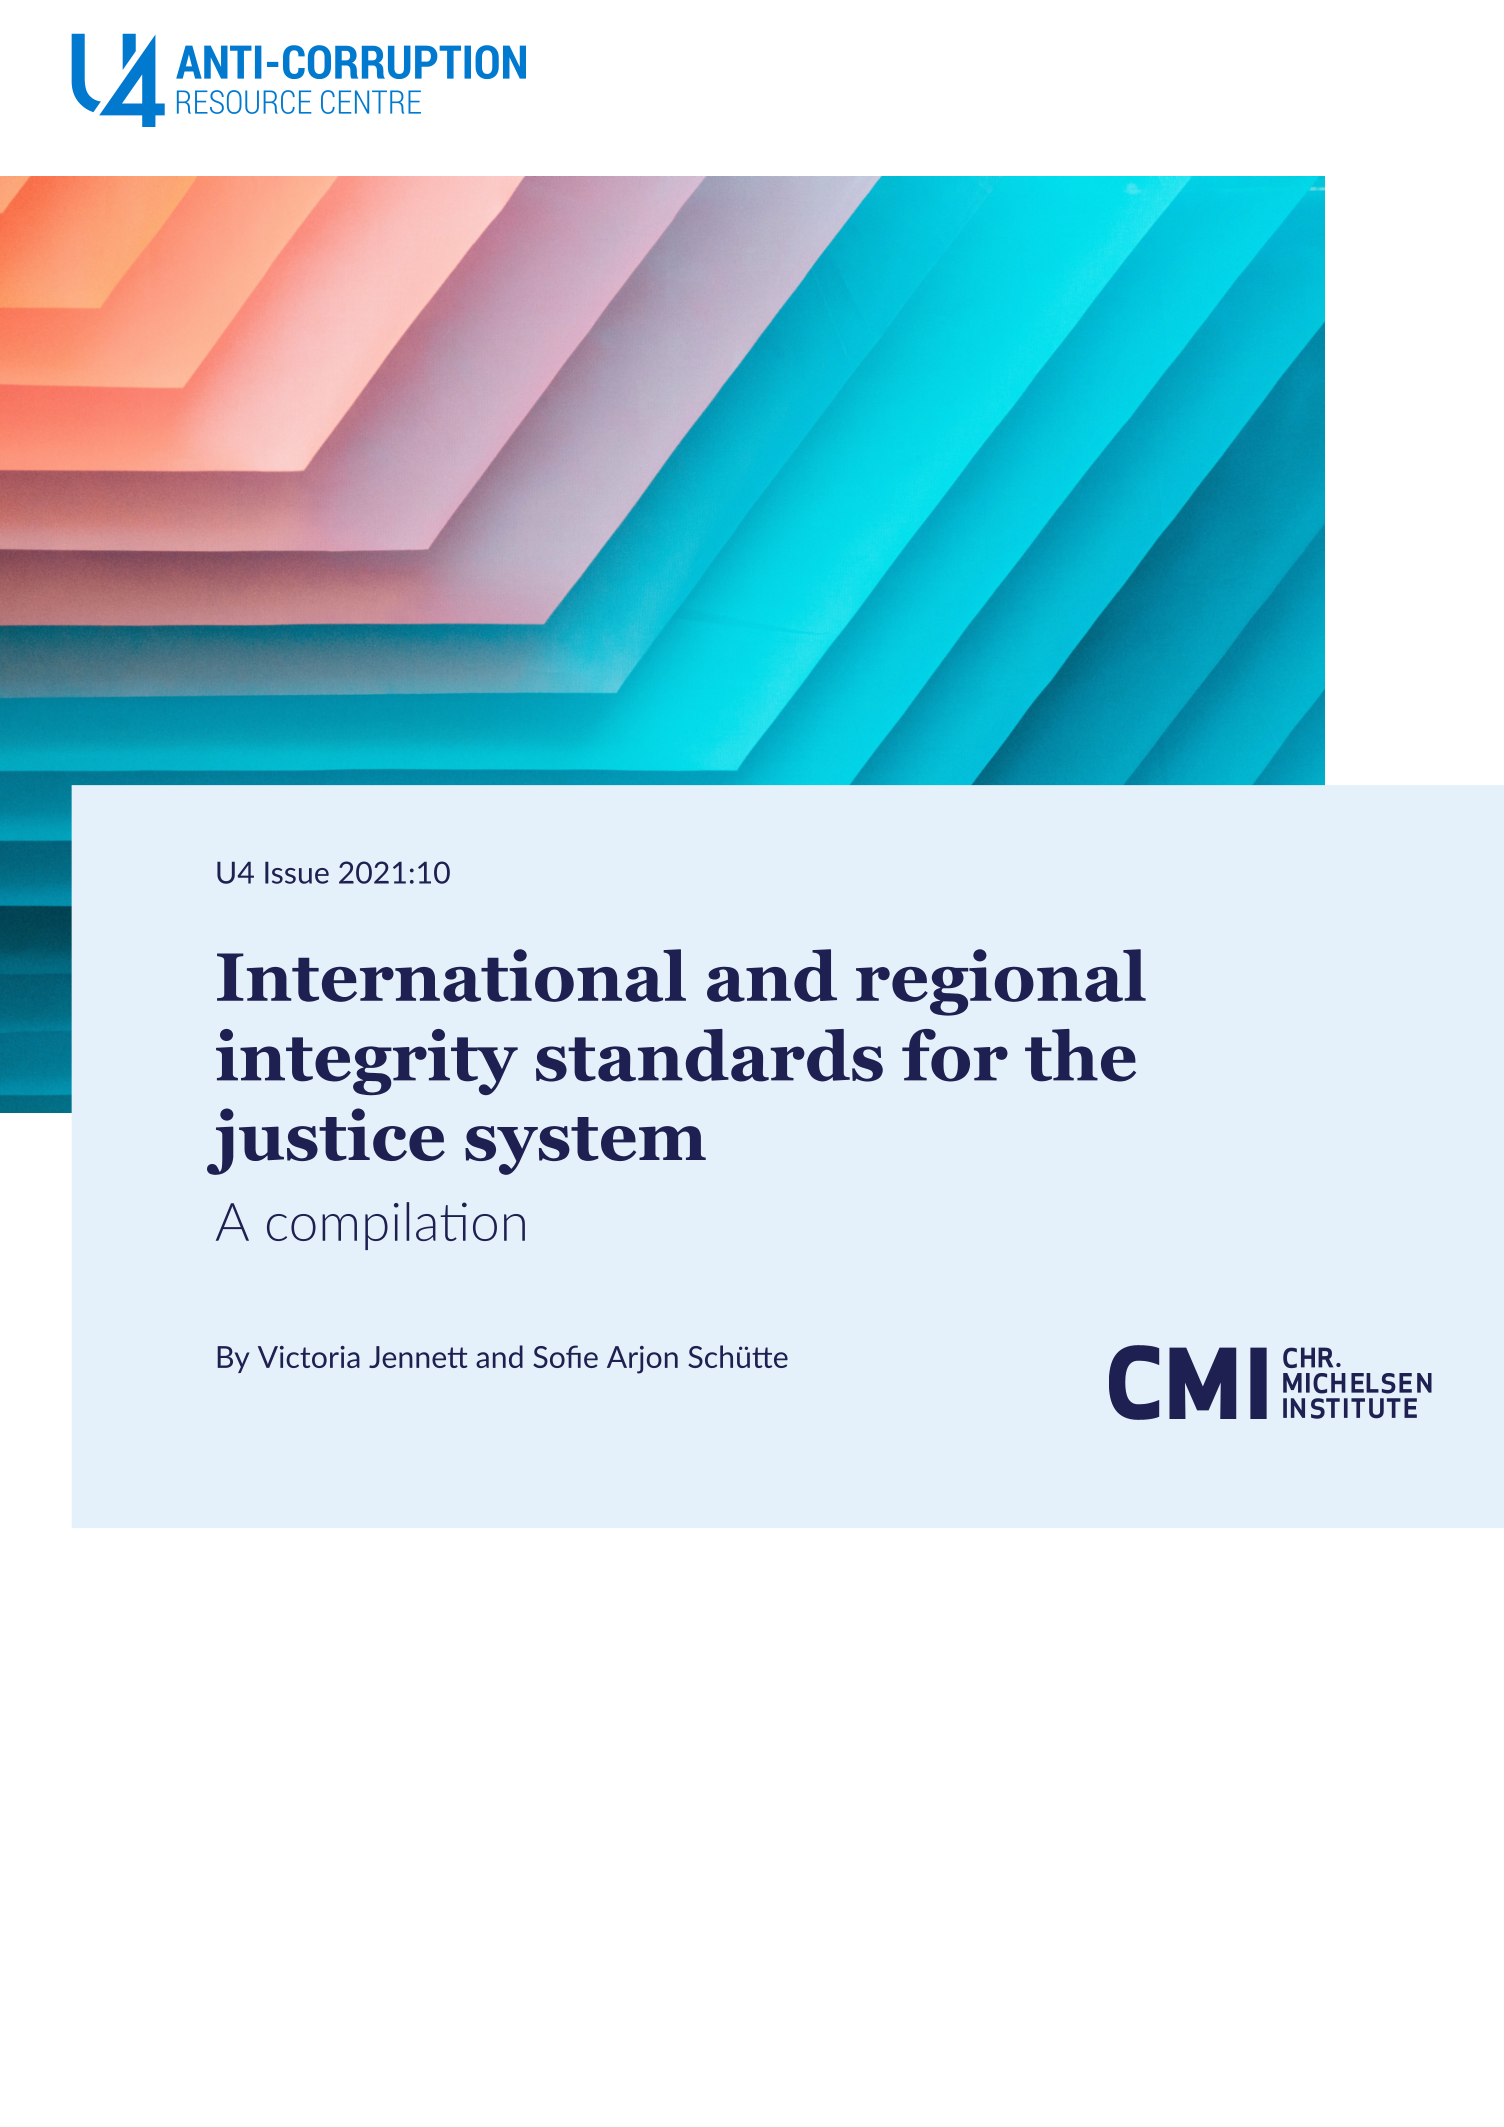 International and regional integrity standards for the justice system